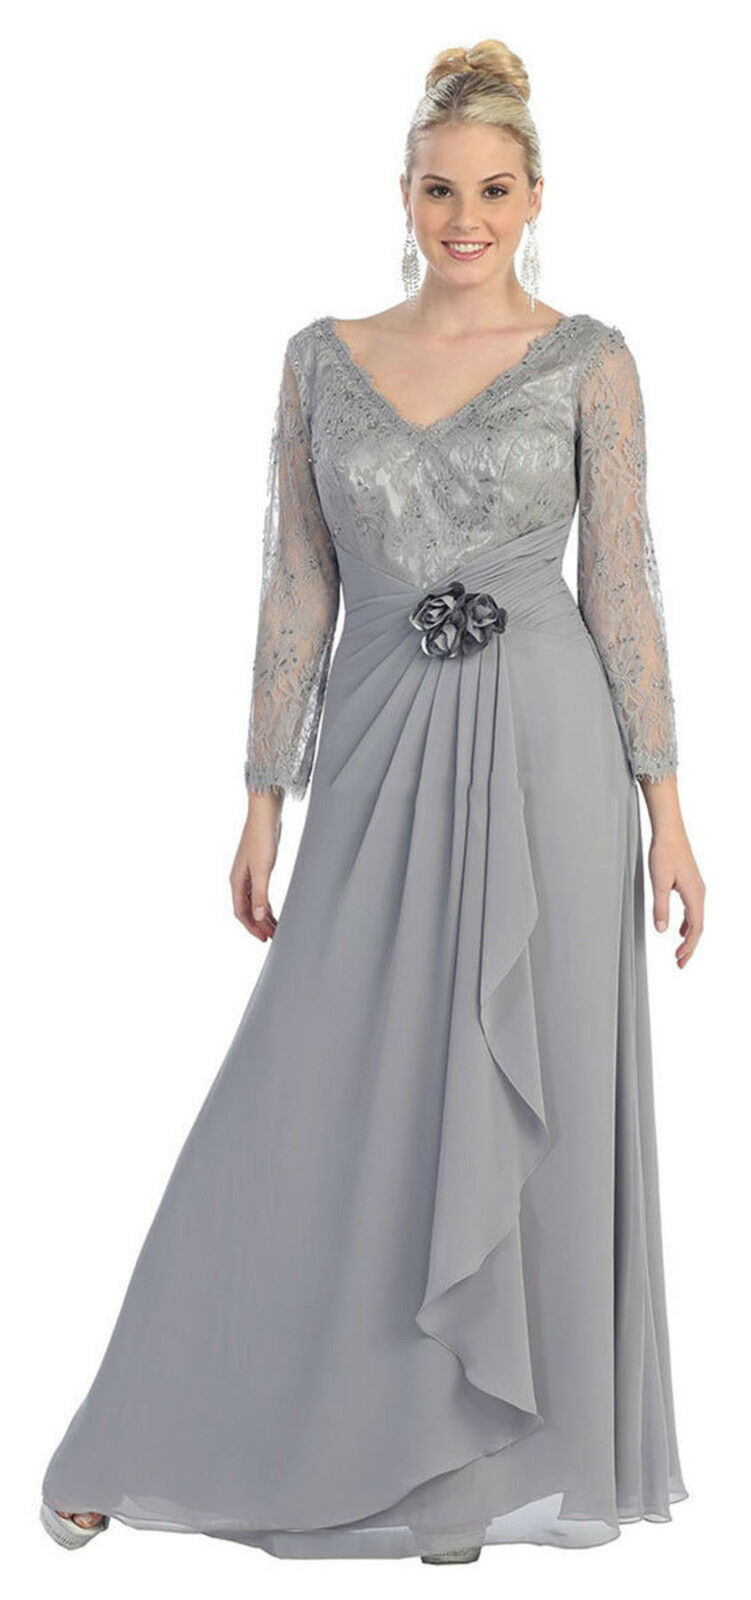 Sale ! Plus Size Mother Of The Bride Groom Dress Formal Evening Long Sleeve Gown